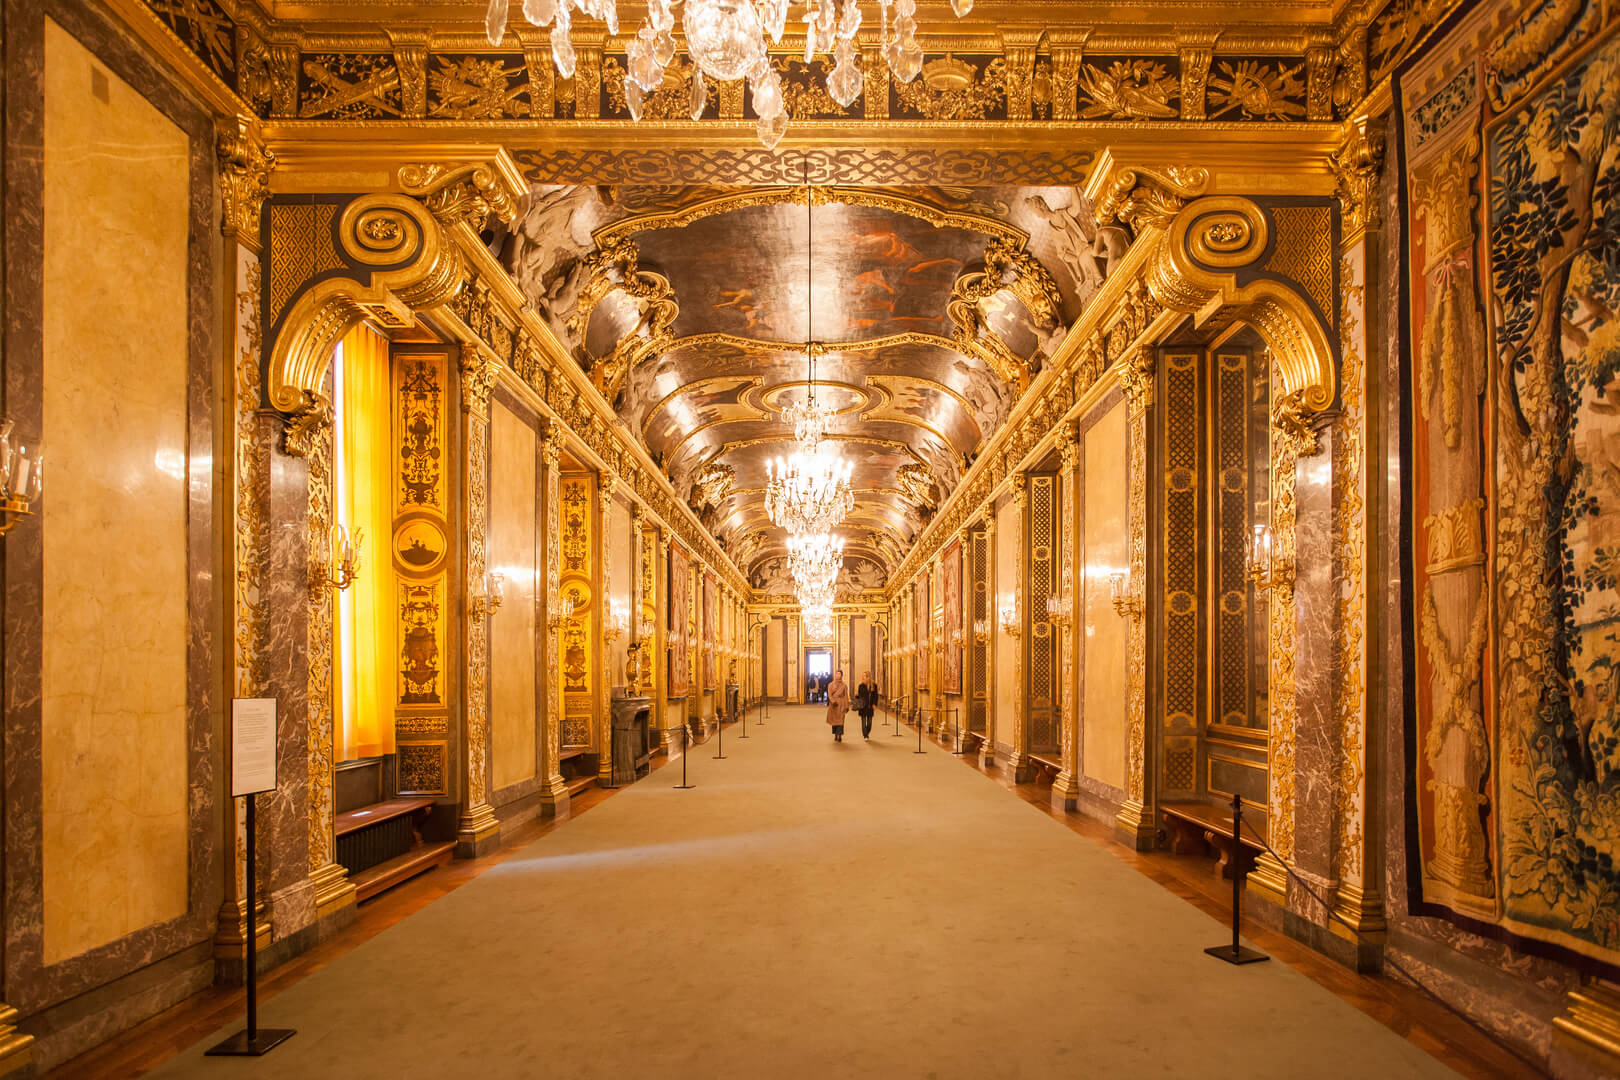 Karl XI Gallery in the Royal Palace of Stockholm, a baroque style room inspired by the hall of mirrors at Versailles, Sweden